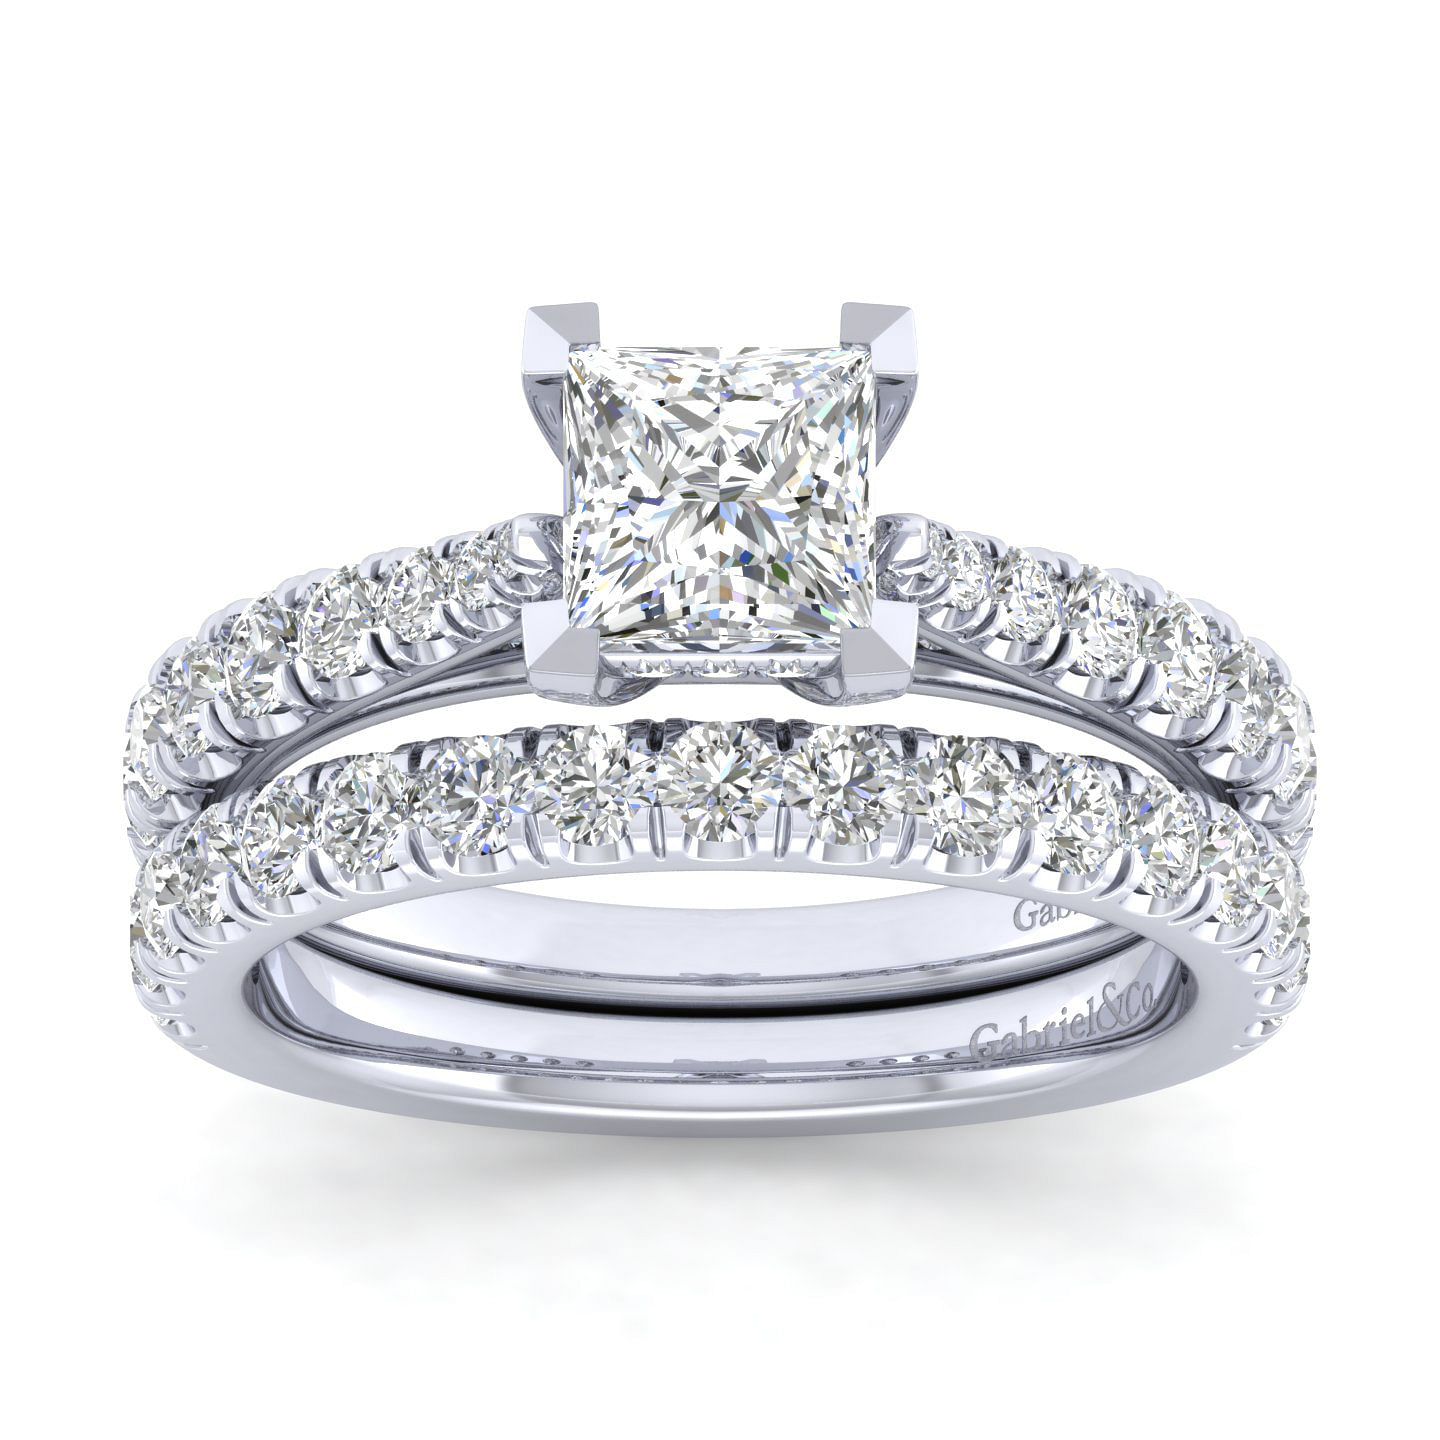 White Gold Diamond Rings - Wedding and Engagement Rings